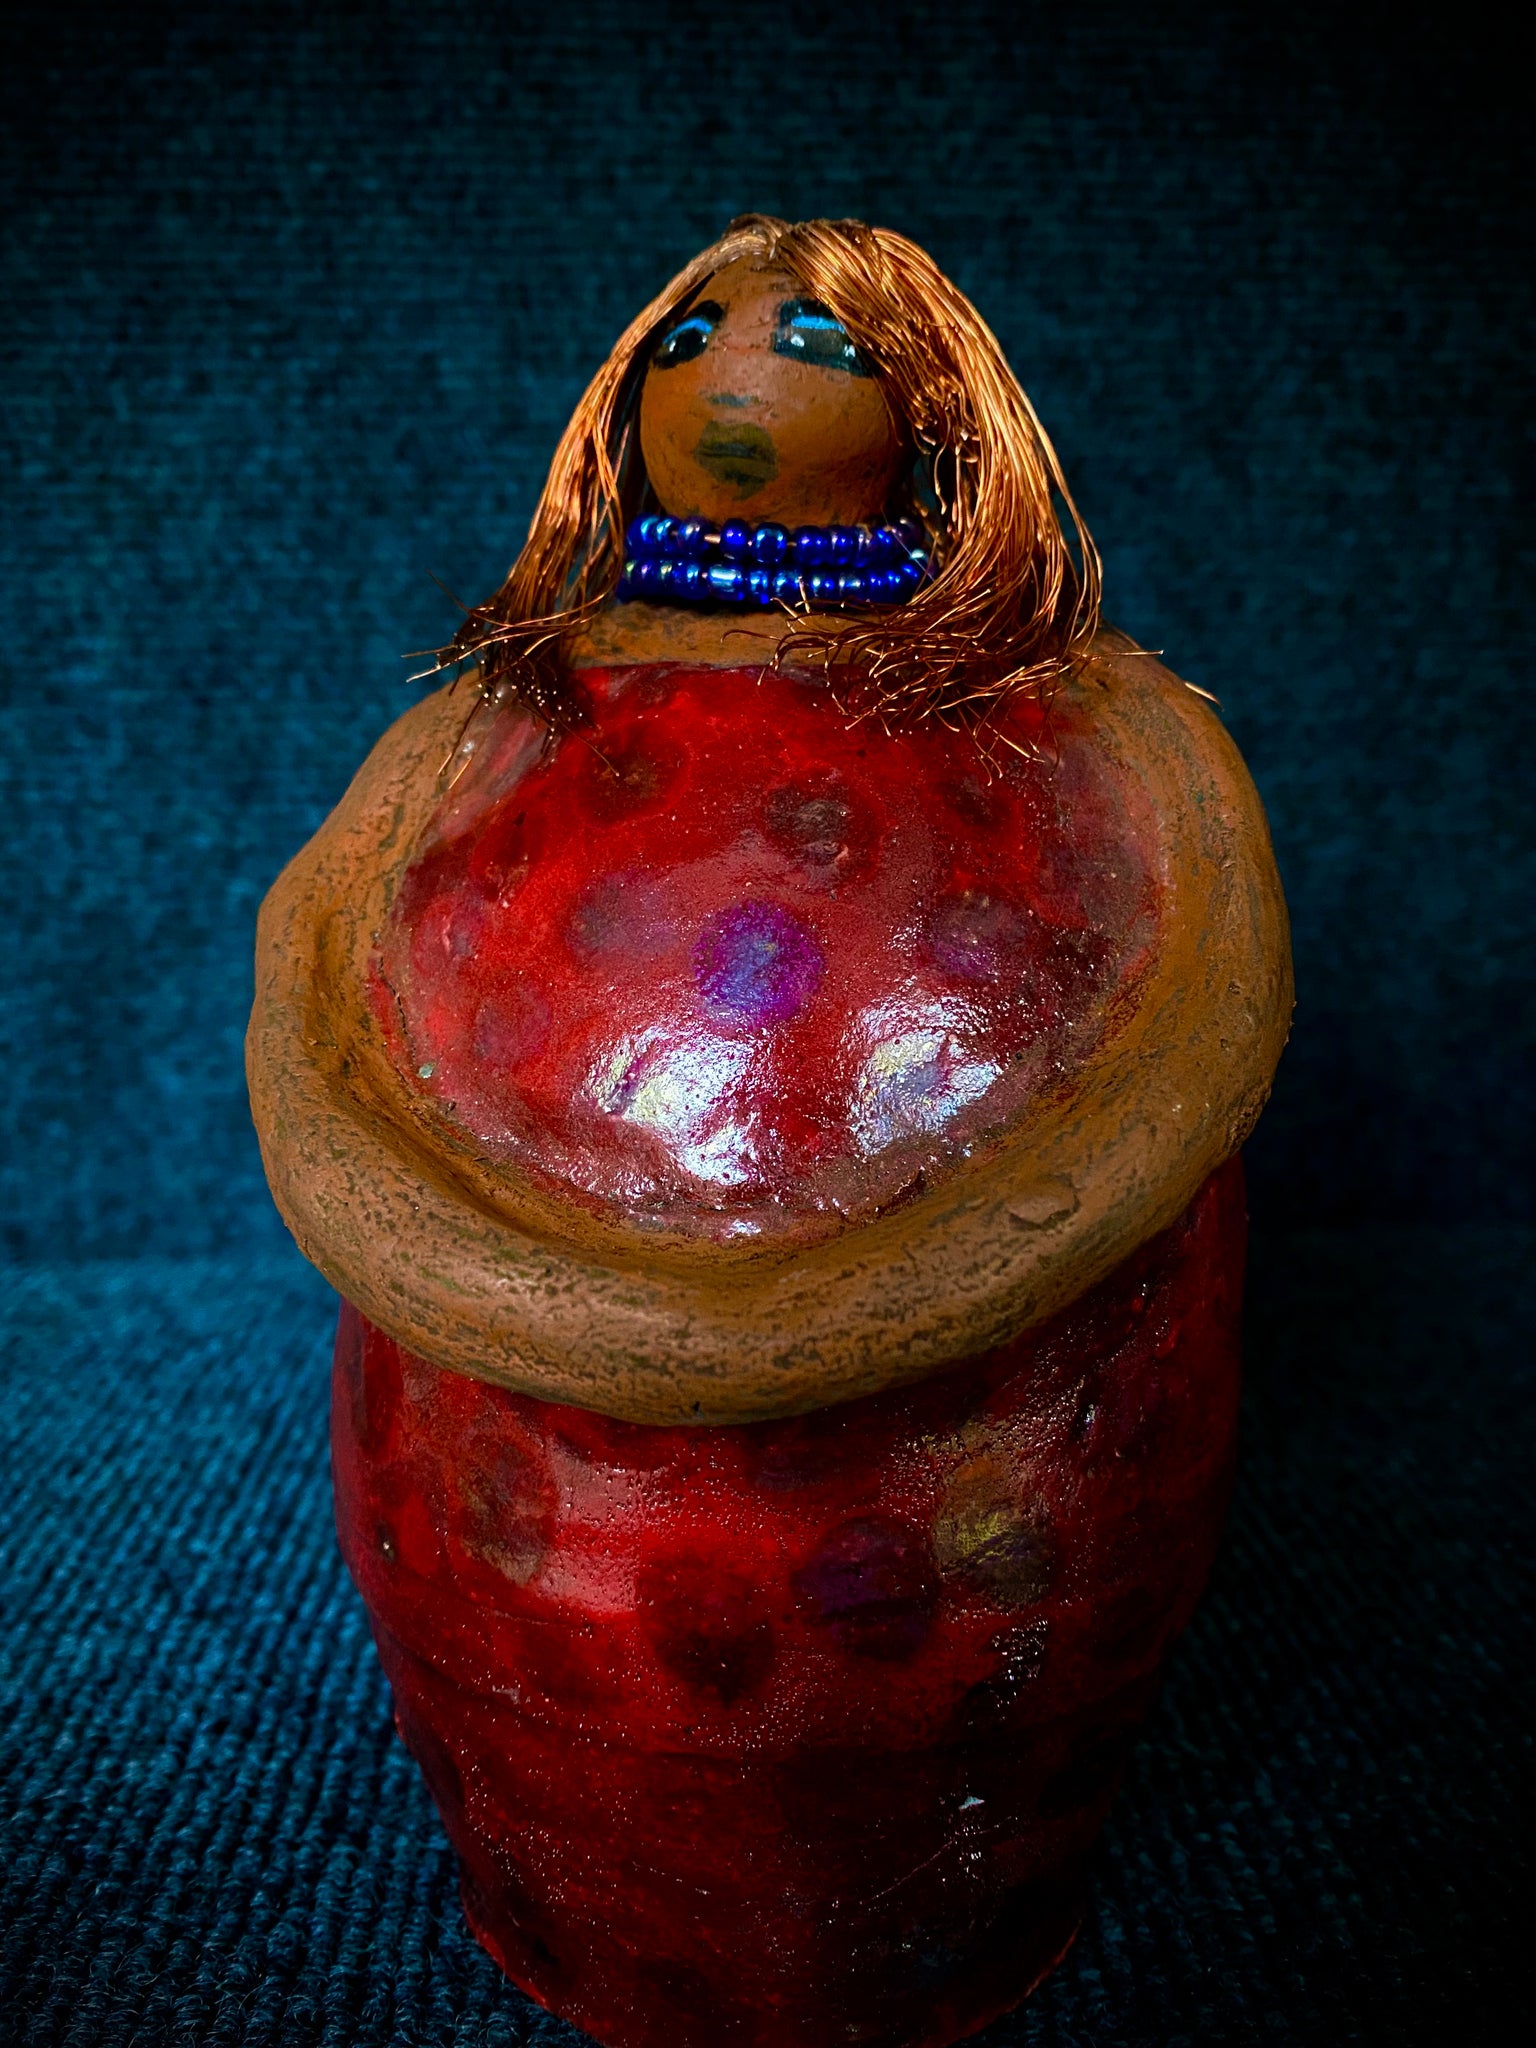 ﻿Meet Dora!  She is a big girl who loves to sing and has aspirations of becoming a  movie star.  Dora stands 7" x 4" x 4.5" and weighs  1.06 lbs.  She has a lovely honey brown complexion with lovely reddish brown lips.  Dora has a lovely gold spotted heart glazed dress.  She wears a beaded  dark blue necklace.  With eyes wide opened, Dora has hopes of finding a new home.   Dora has a twin sister name Cora.